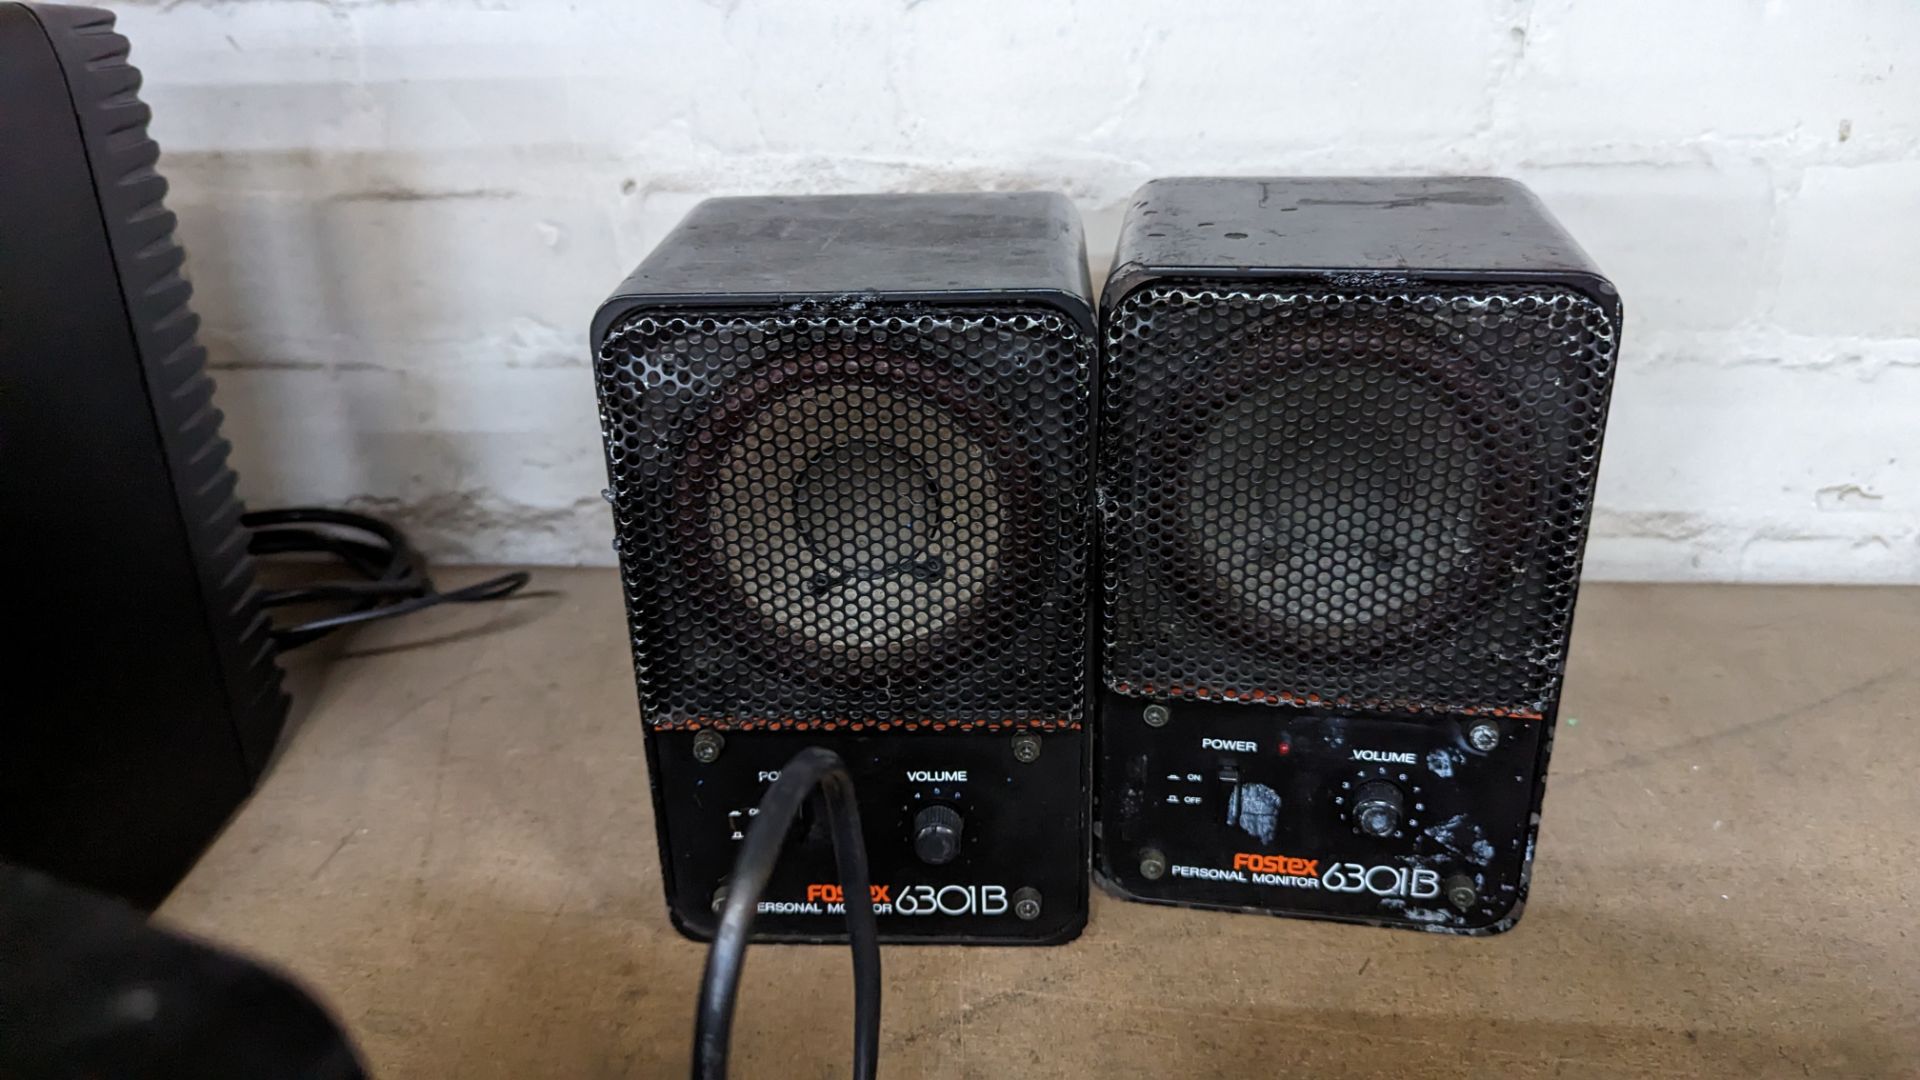 3 off Fostex personal monitor speakers, model 6301B. Please note the specification of each speaker - Image 5 of 8